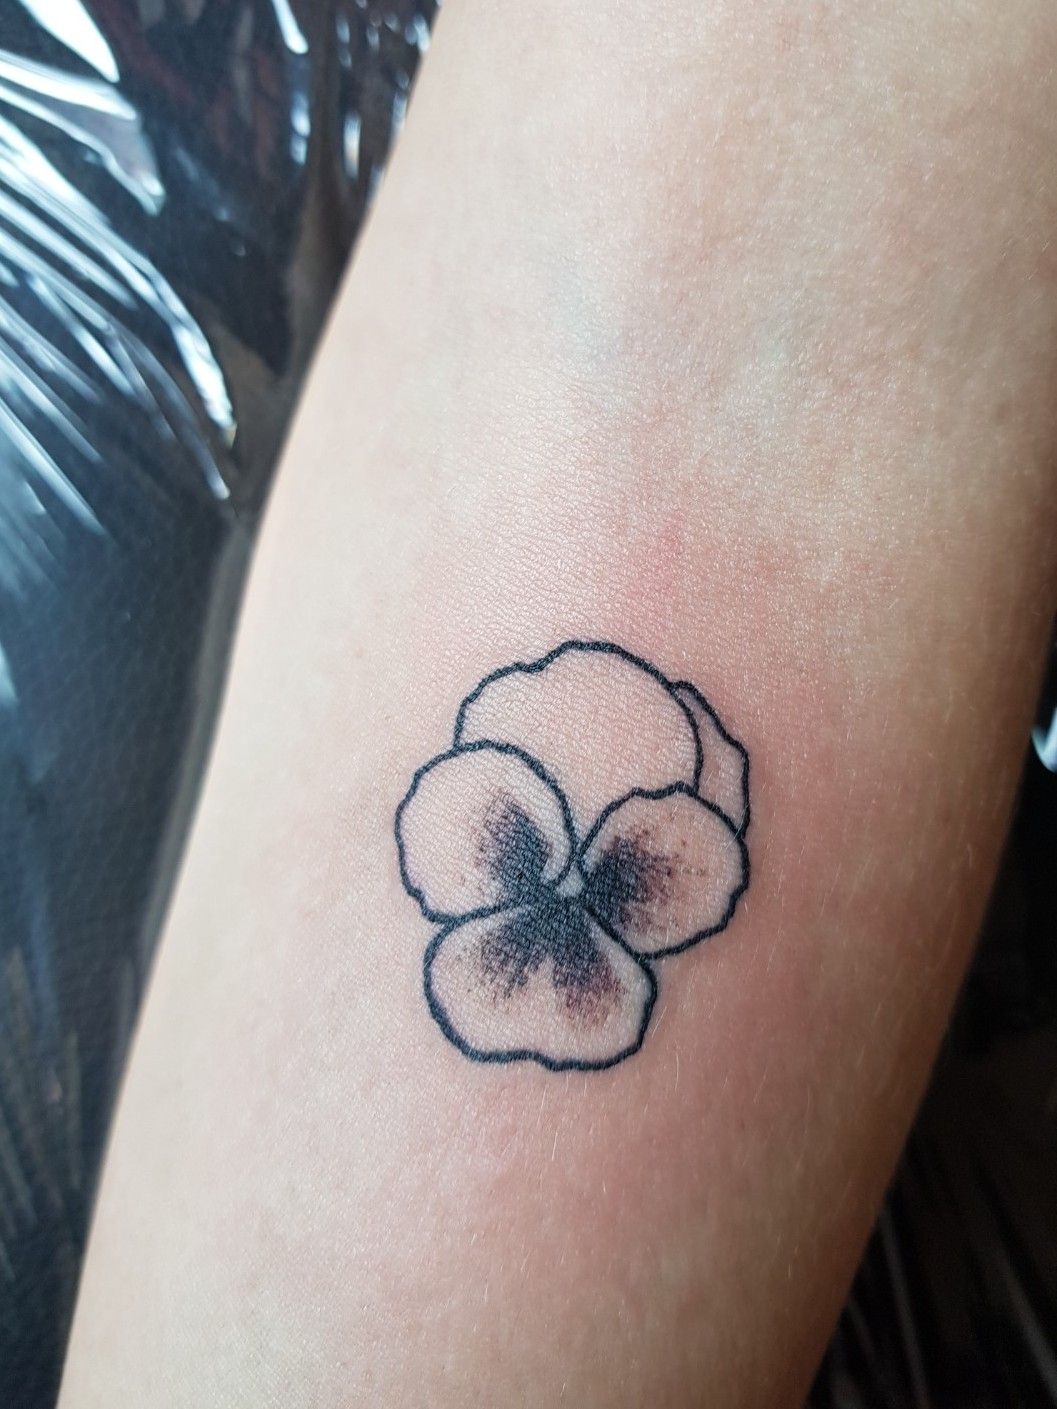 10 Ravishing Pansy Tattoo Designs With Images  Styles At LIfe